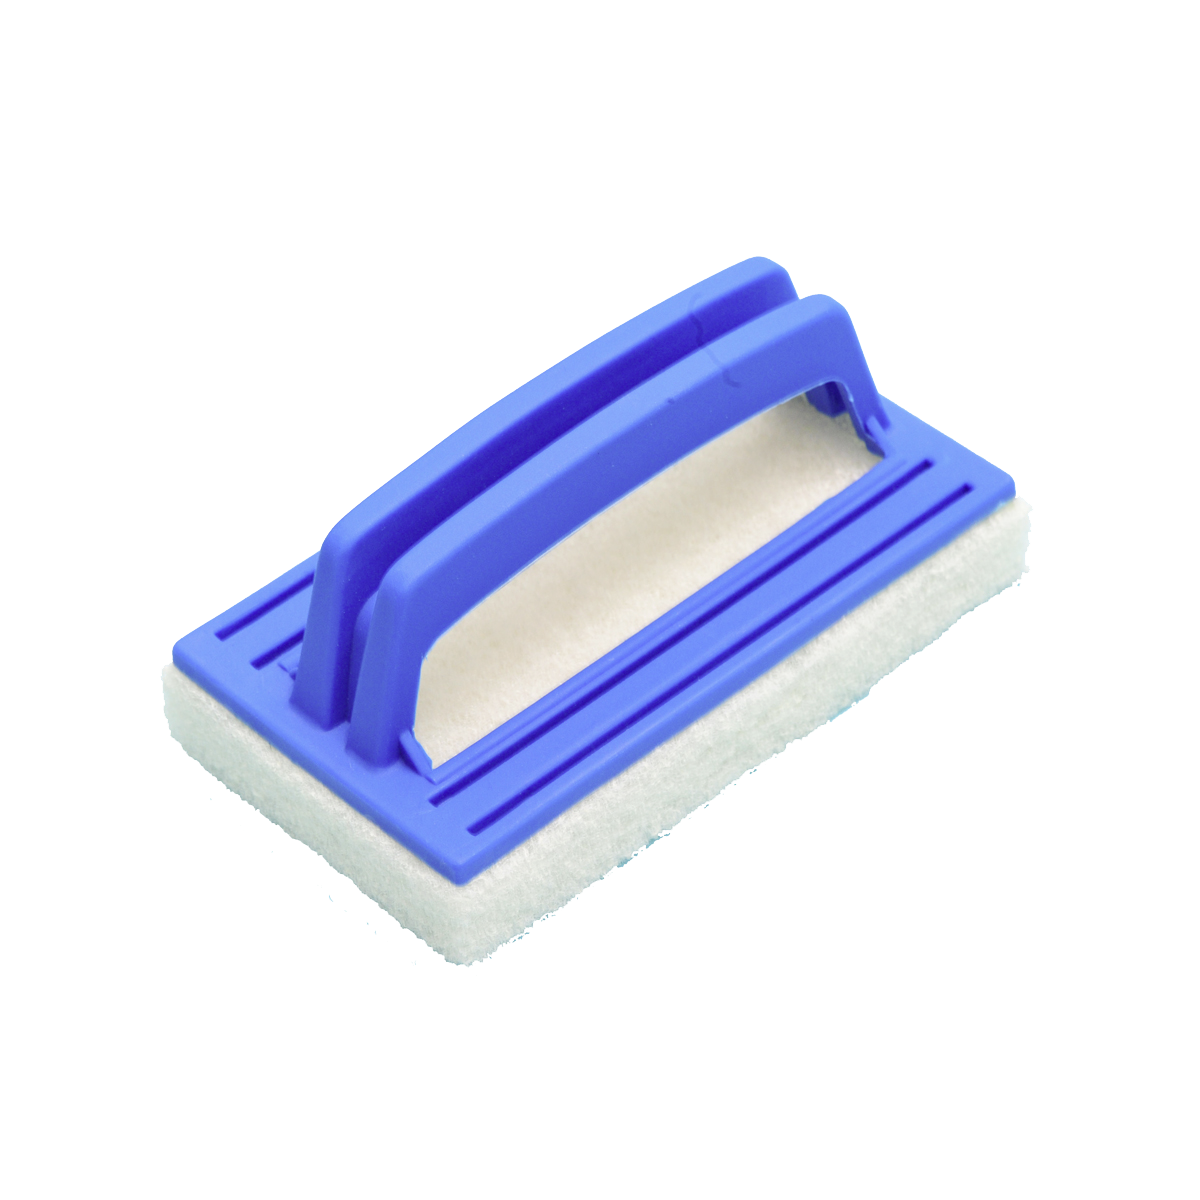 Smart Hand Scrubber blue, 14,5 x 8,5 x 3 cm, single packed Smart Hand Scrubber blue, 14,5 x 8,5 x 3 cm, single packed